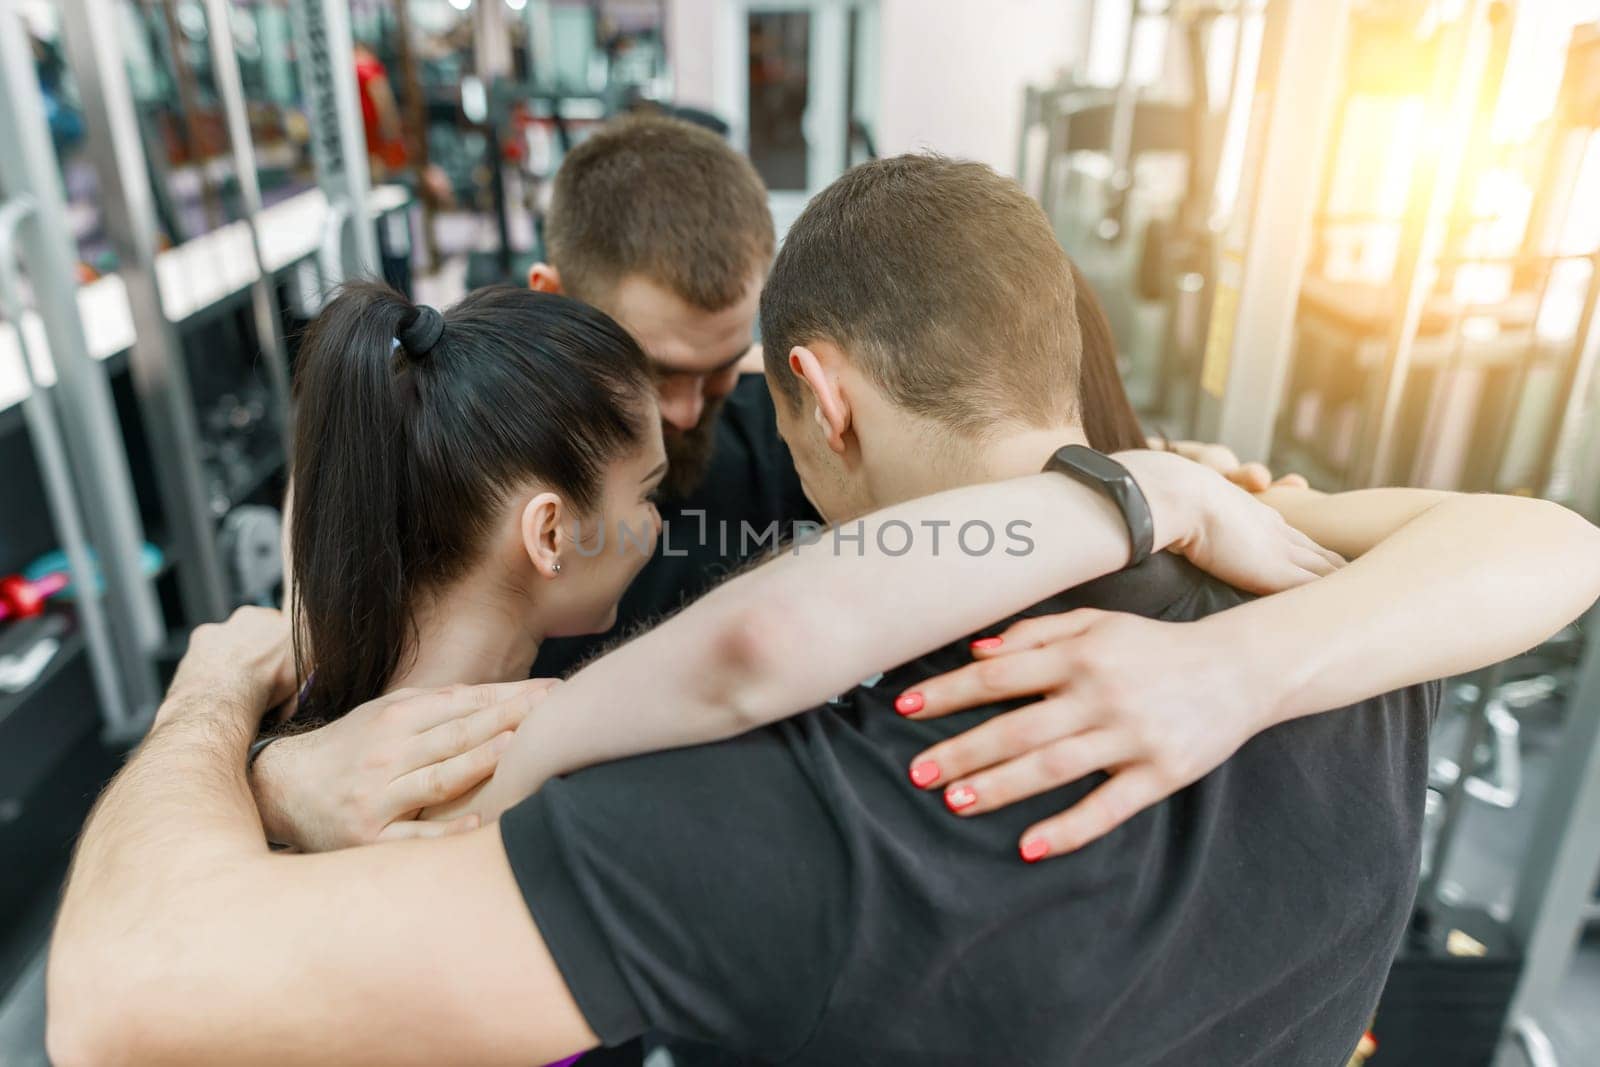 Group of young sports people embracing together in fitness gym backs. Fitness, sport, teamwork, motivation, people, healthy lifestyle concept.